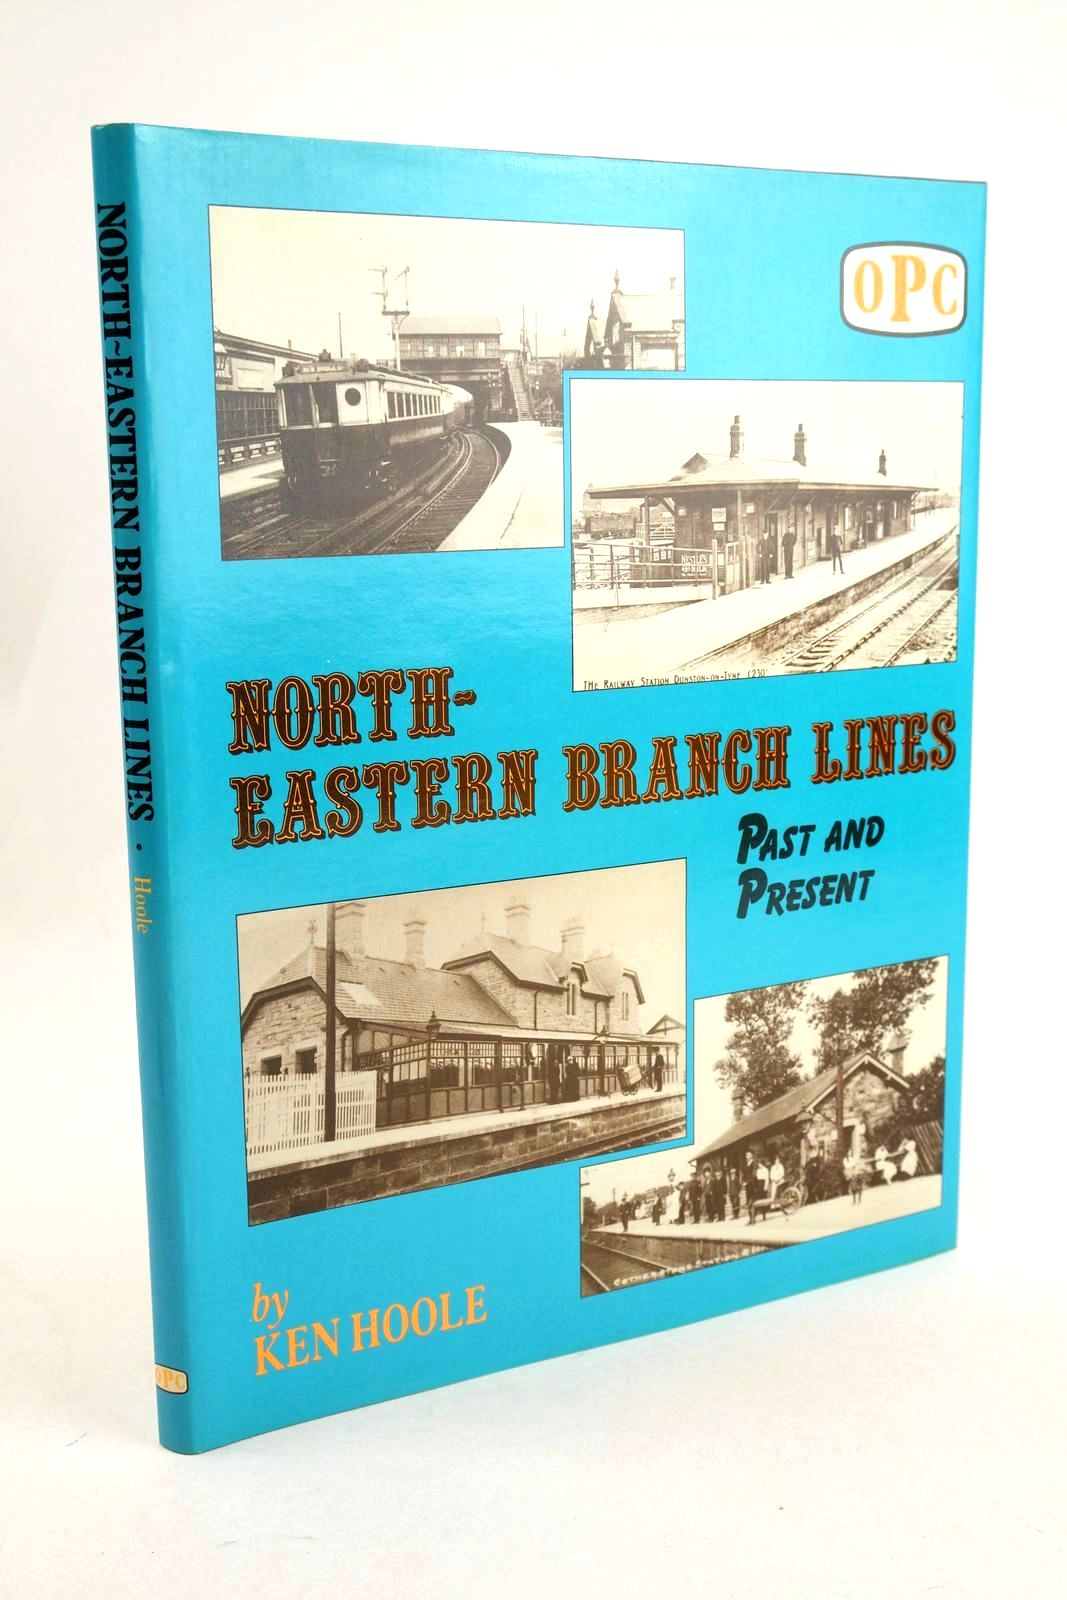 Photo of NORTH-EASTERN BRANCH LINES PAST AND PRESENT written by Hoole, Ken published by Oxford Publishing Co (STOCK CODE: 1326956)  for sale by Stella & Rose's Books